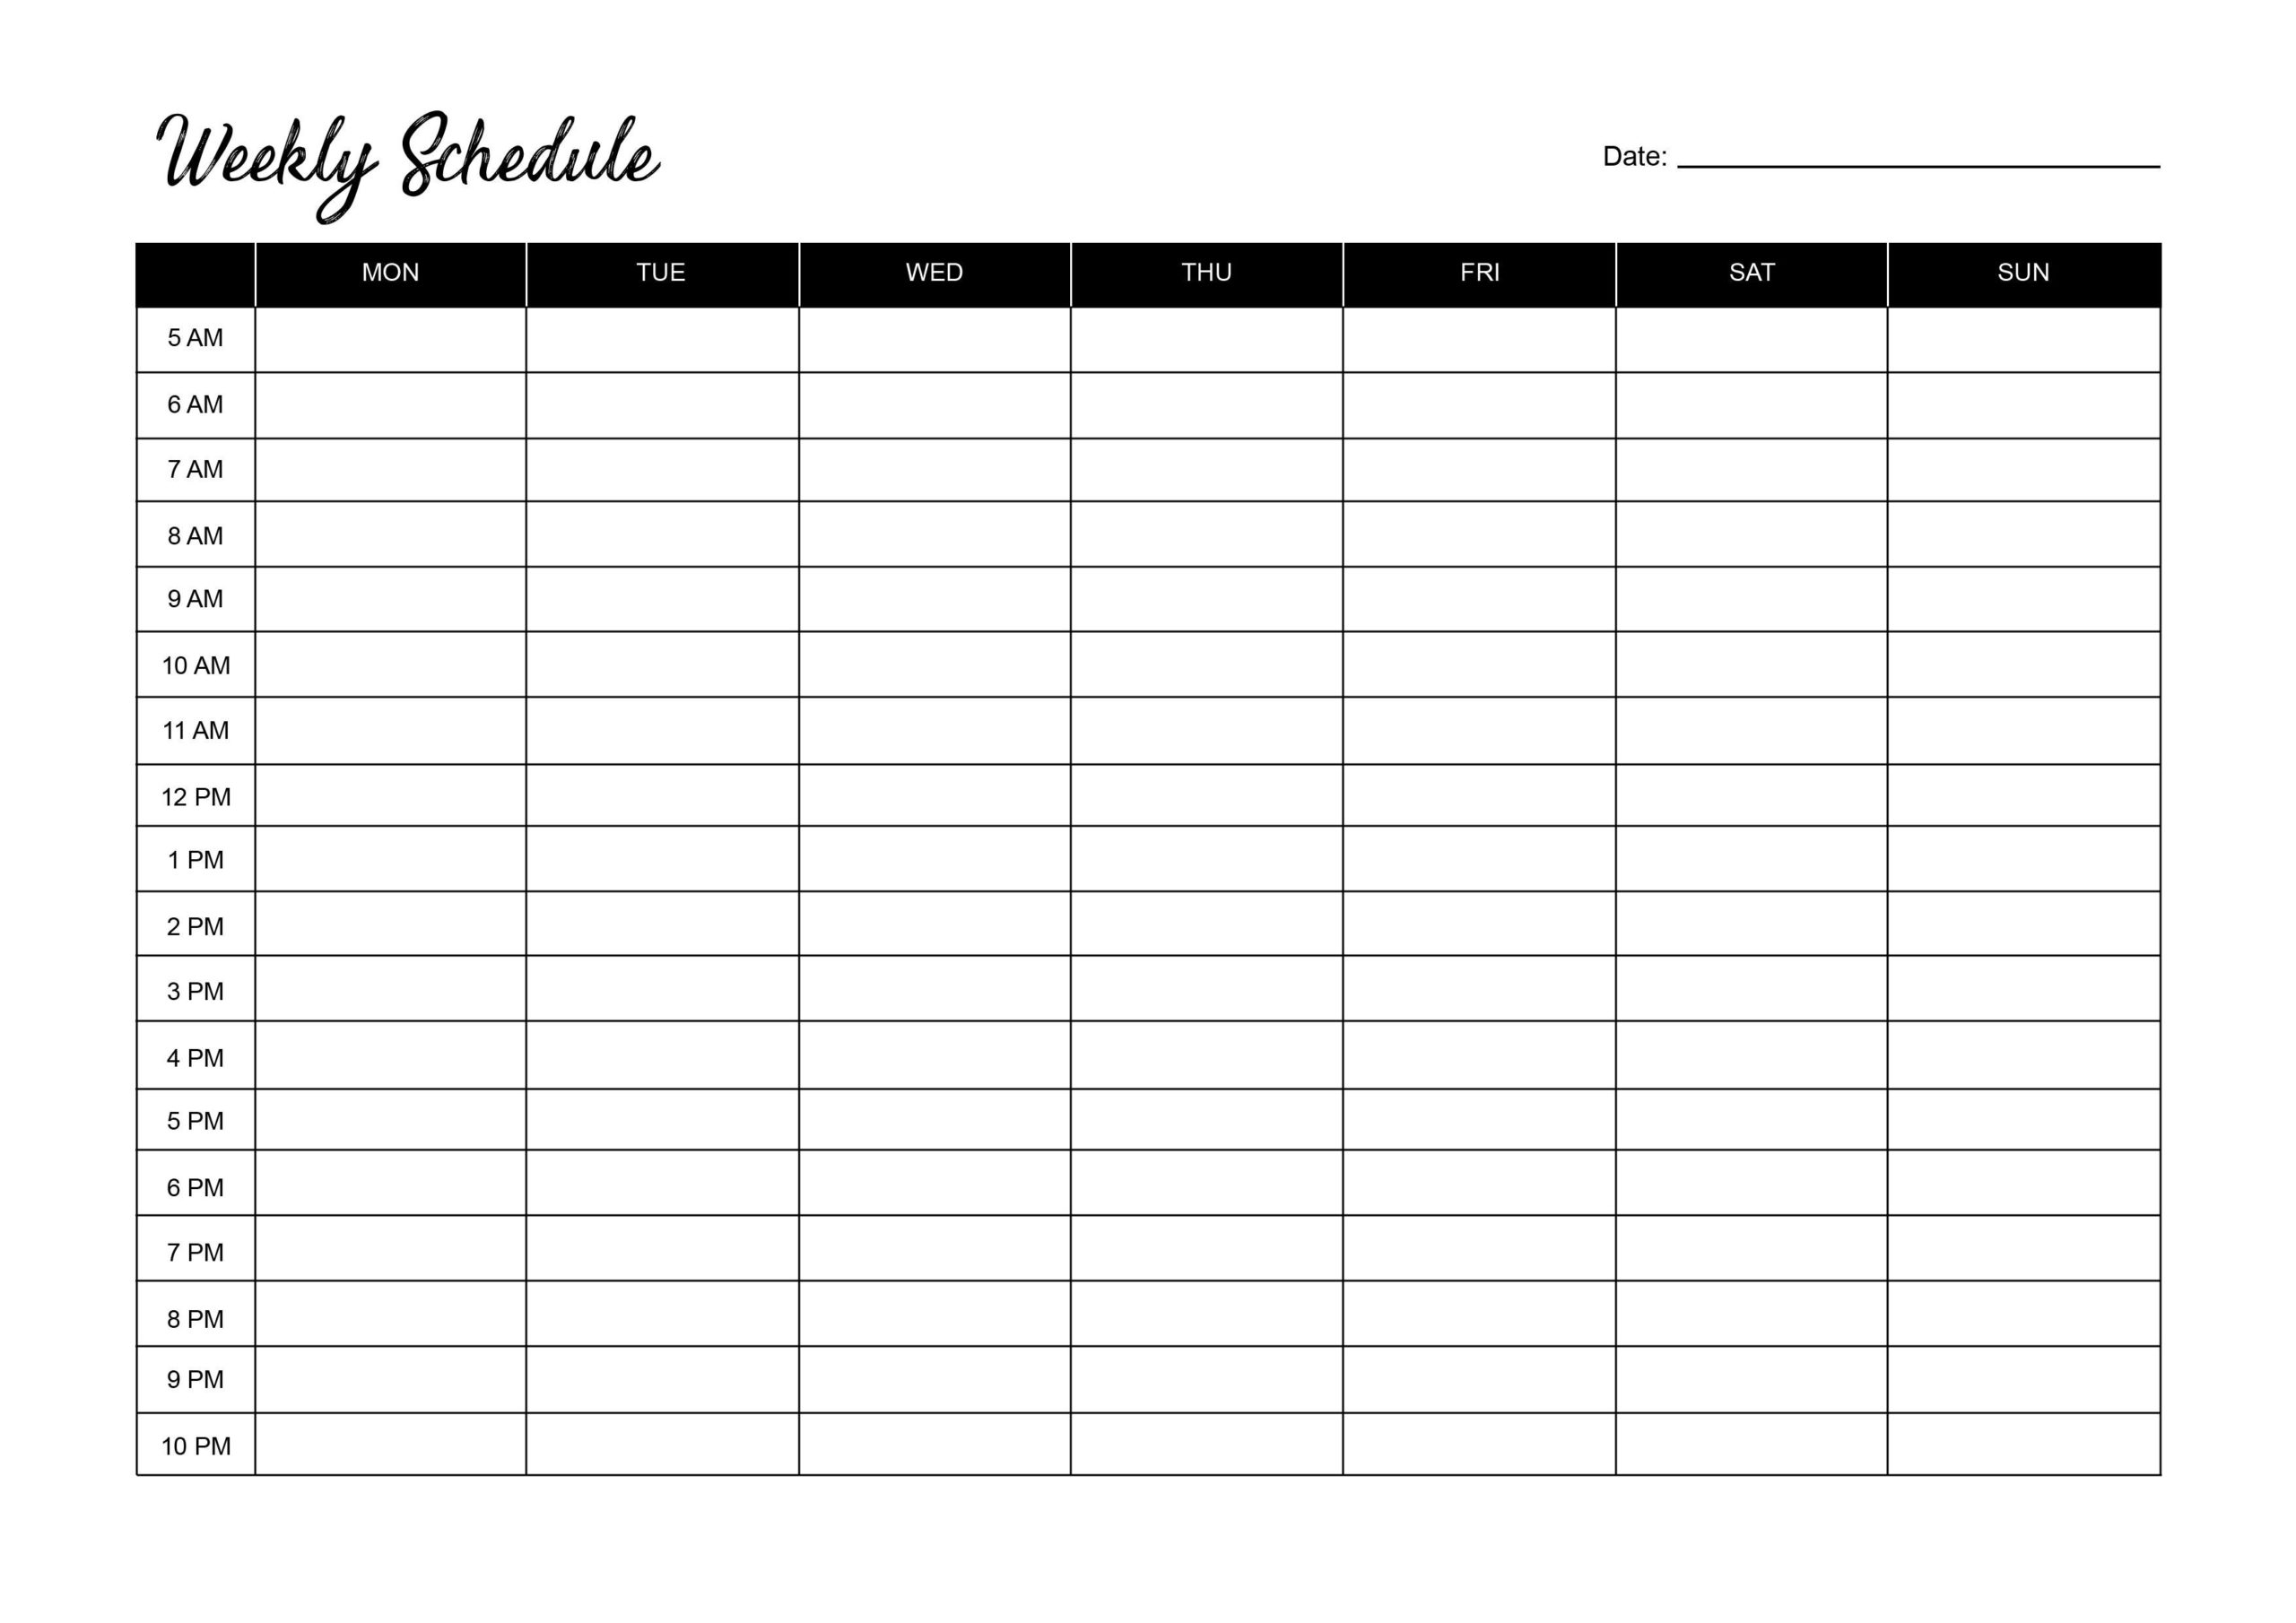 weekly time slots with schedule 23